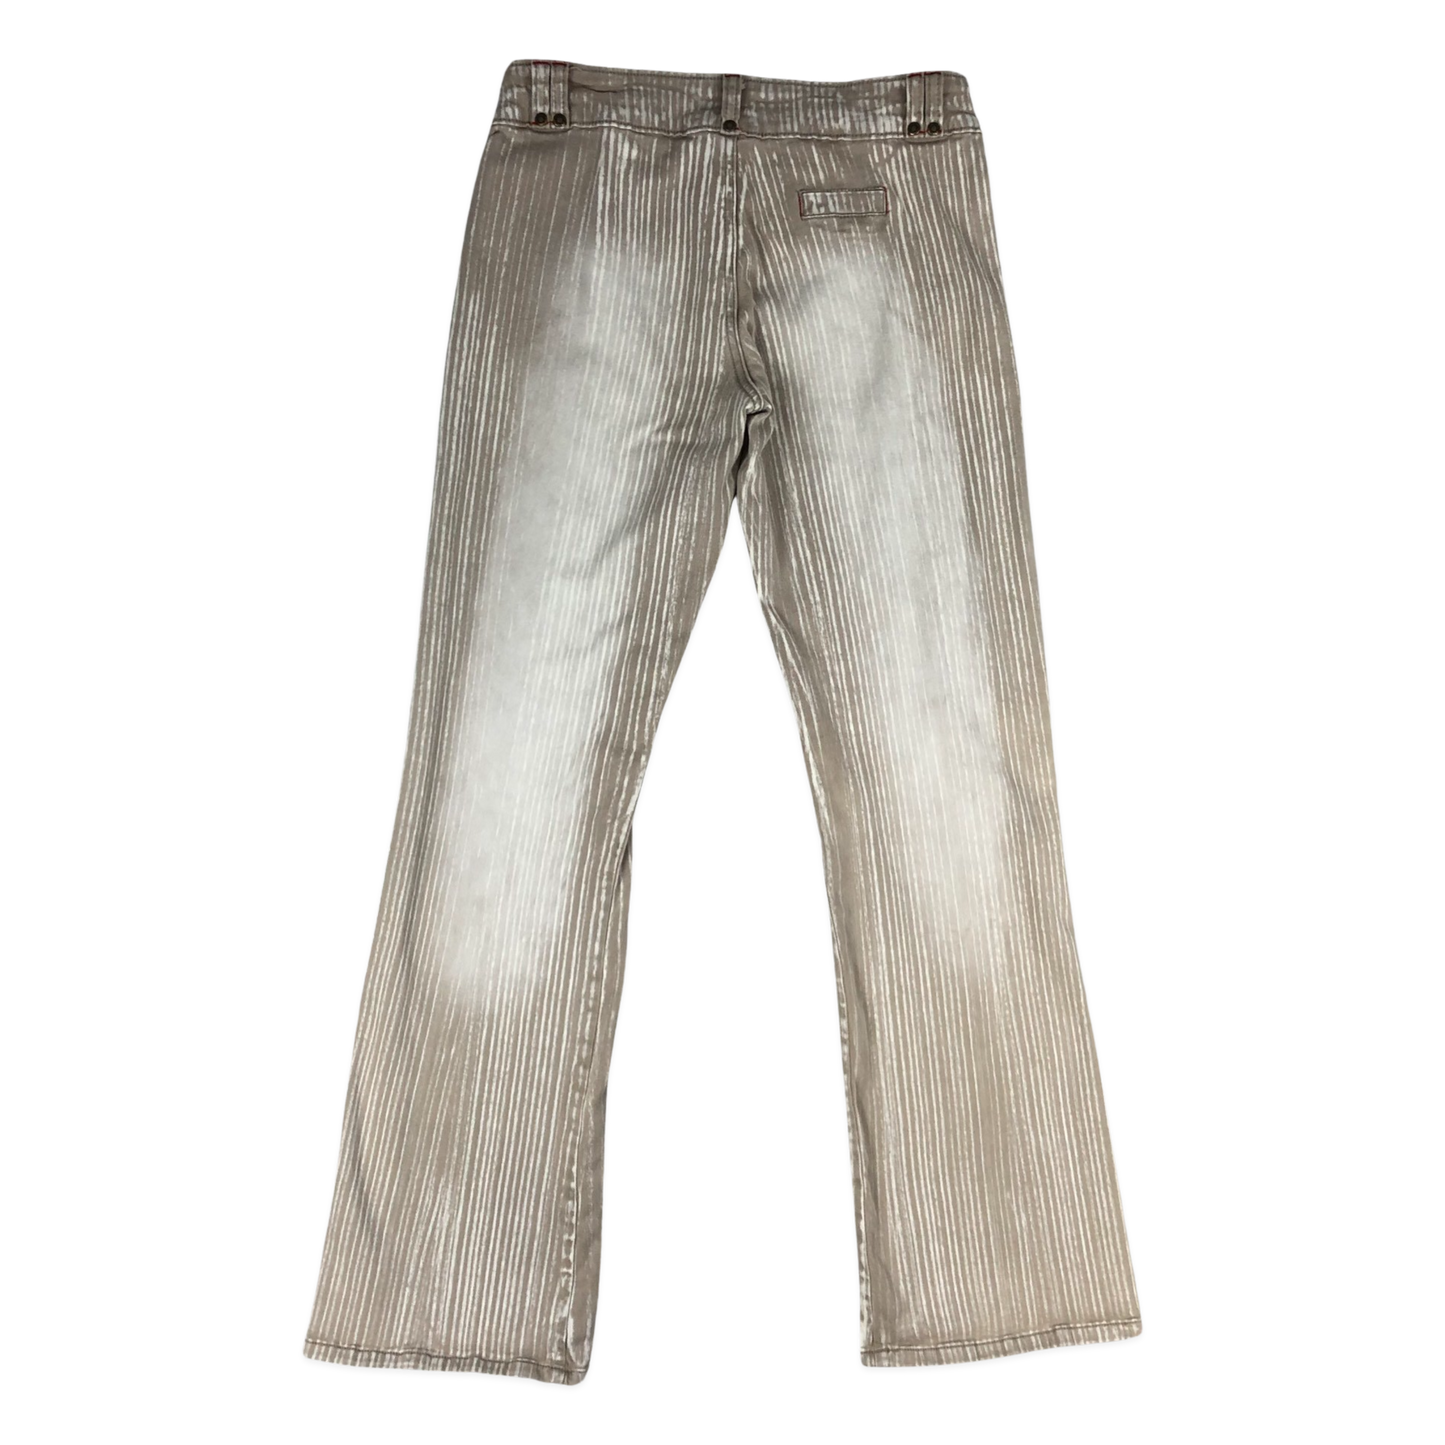 Vintage Striped Beige and White Flared Trousers 32W 36L